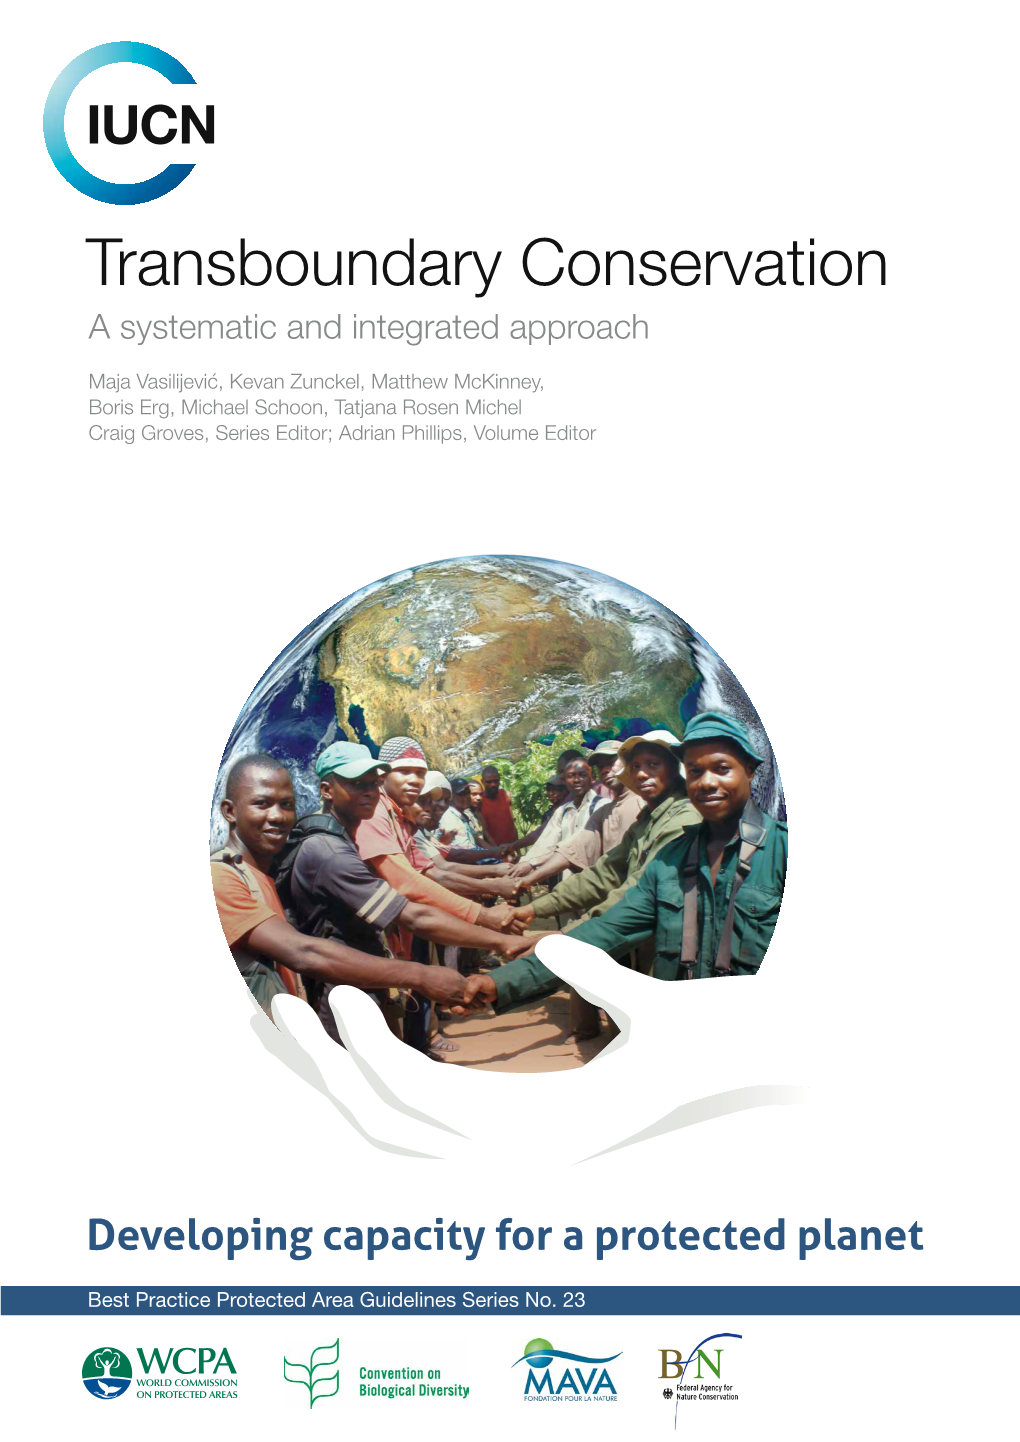 Transboundary Conservation a Systematic and Integrated Approach